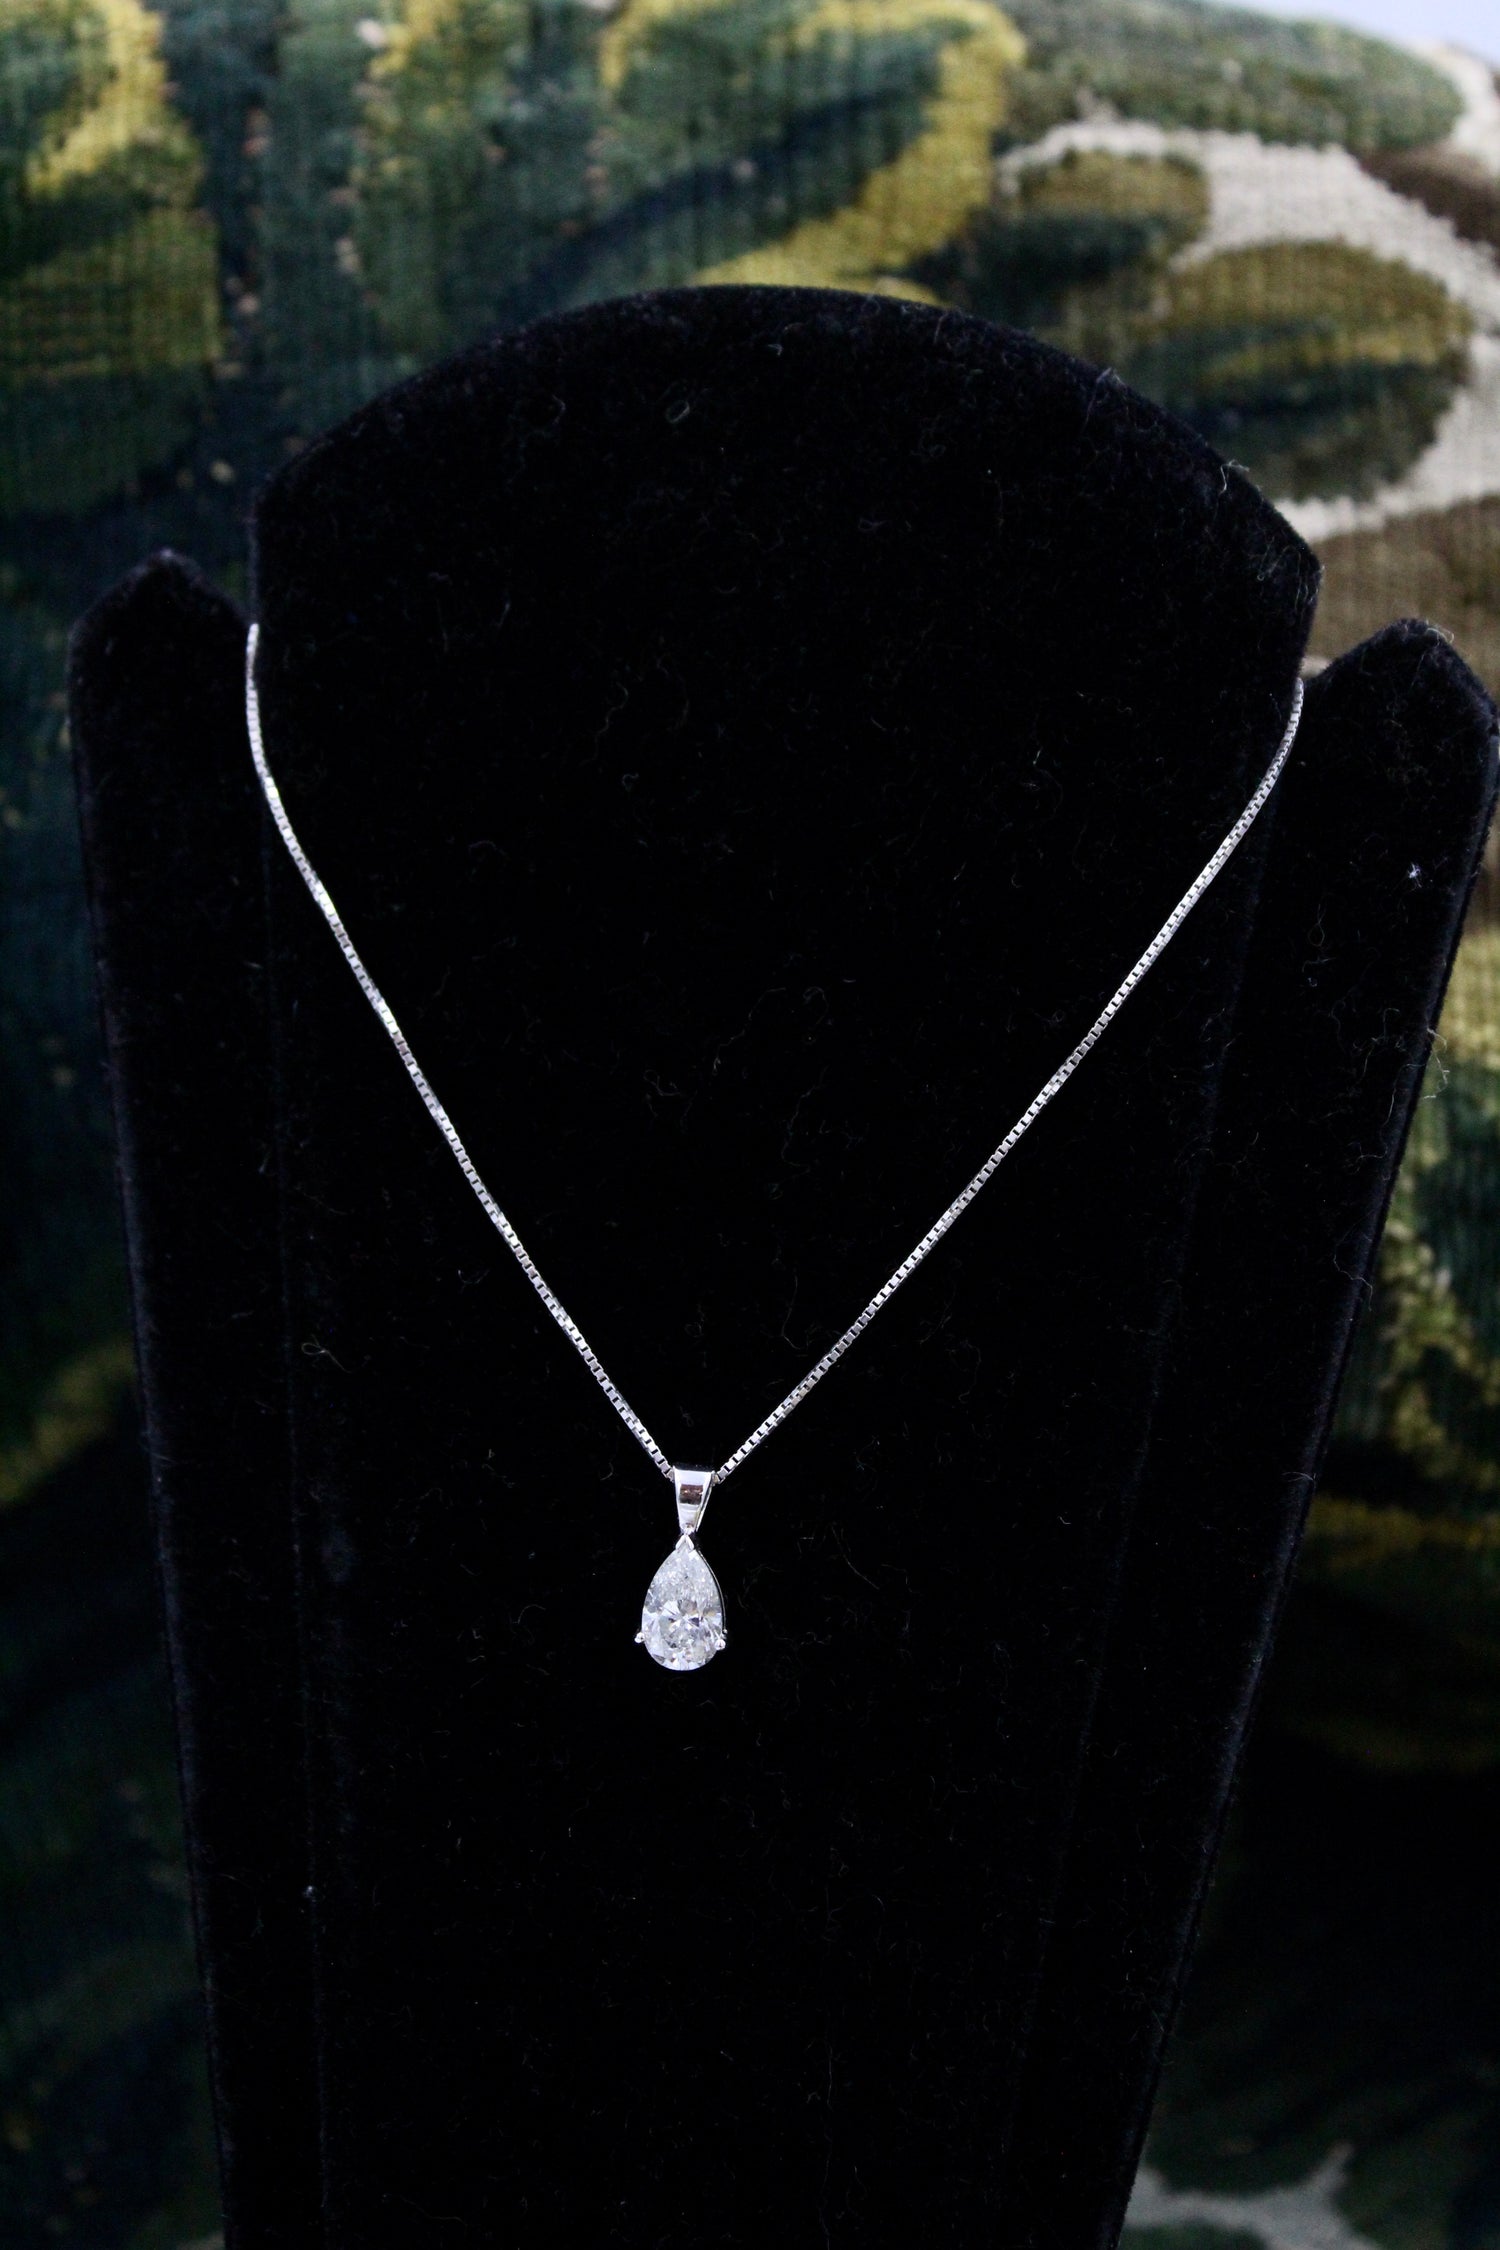 A very fine Pear Shaped  Diamond Pendant, independently assessed as being of 1.81 Carats (weighed), G Colour and SI Clarity, on an 18 Carat (marked) White Gold Chain. - Robin Haydock Antiques